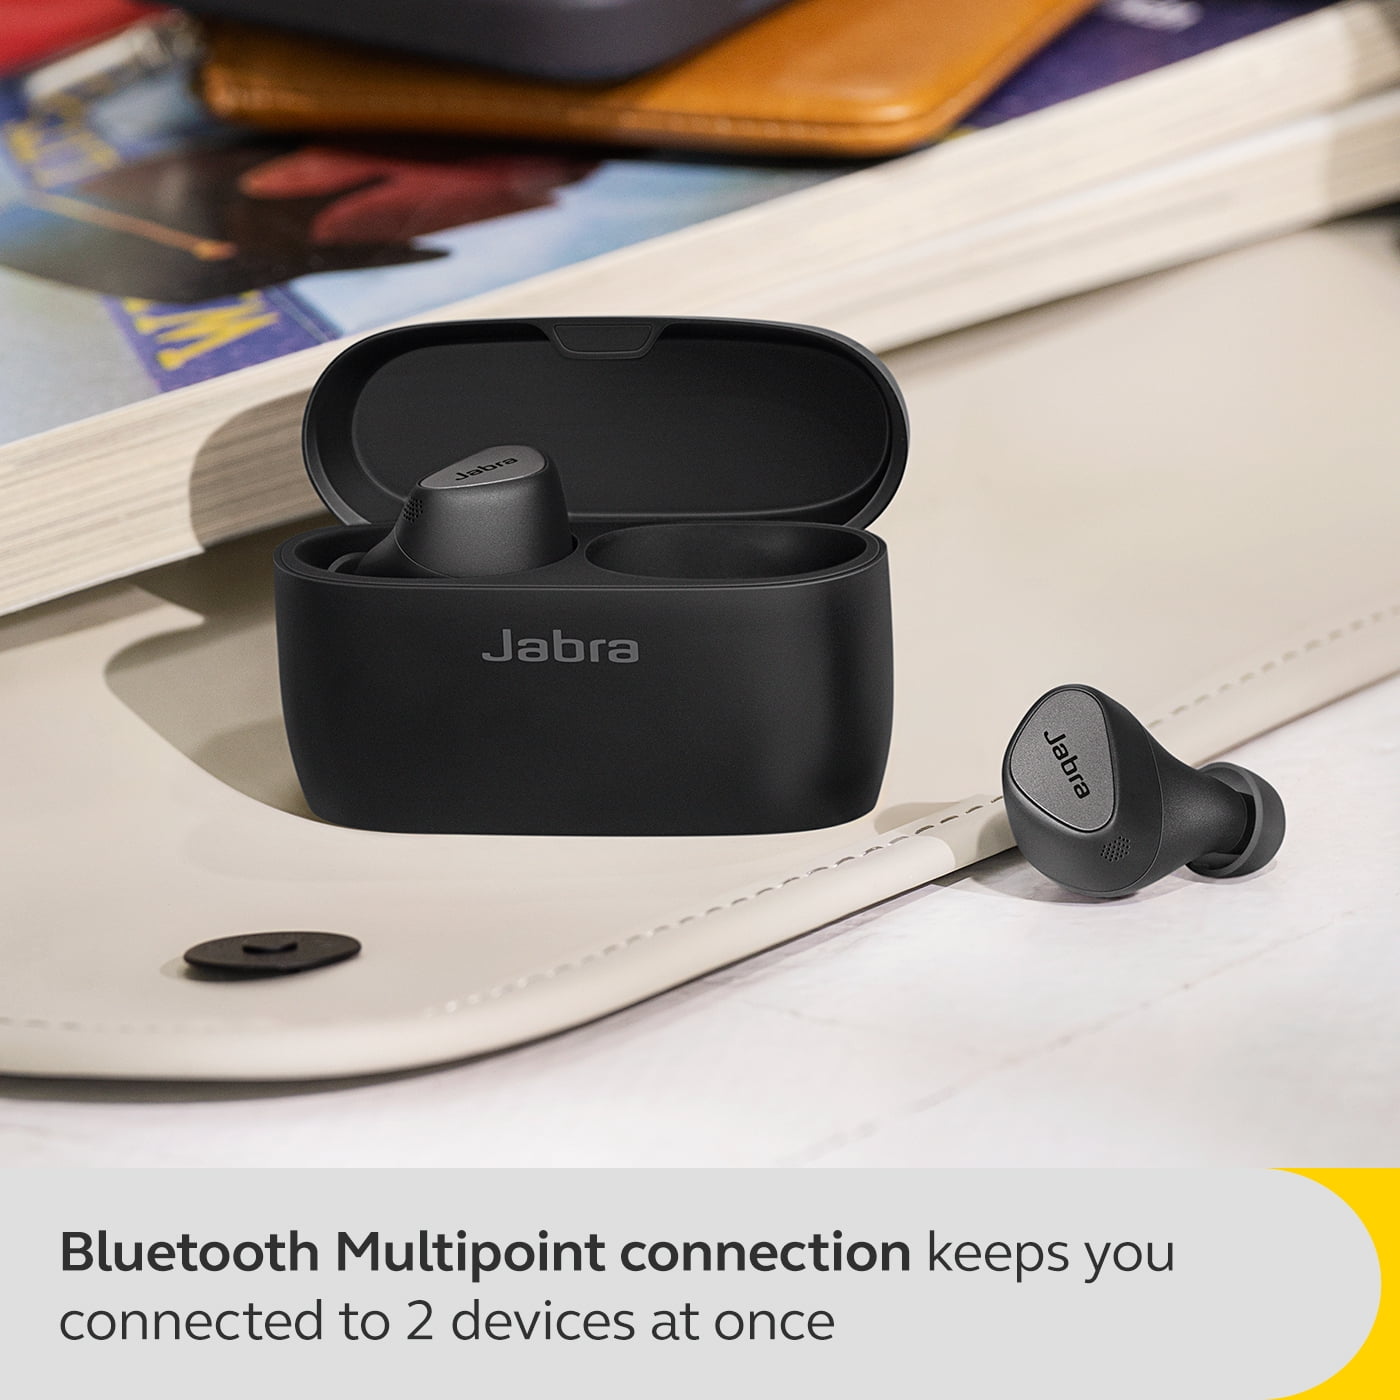  Jabra Elite 5 True Wireless in-Ear Bluetooth Earbuds - Hybrid  Active Noise Cancellation (ANC), 6 Built-in Microphones for Clear Calls,  Small Ergonomic Fit and 6mm Speakers - Titanium Black : Everything Else